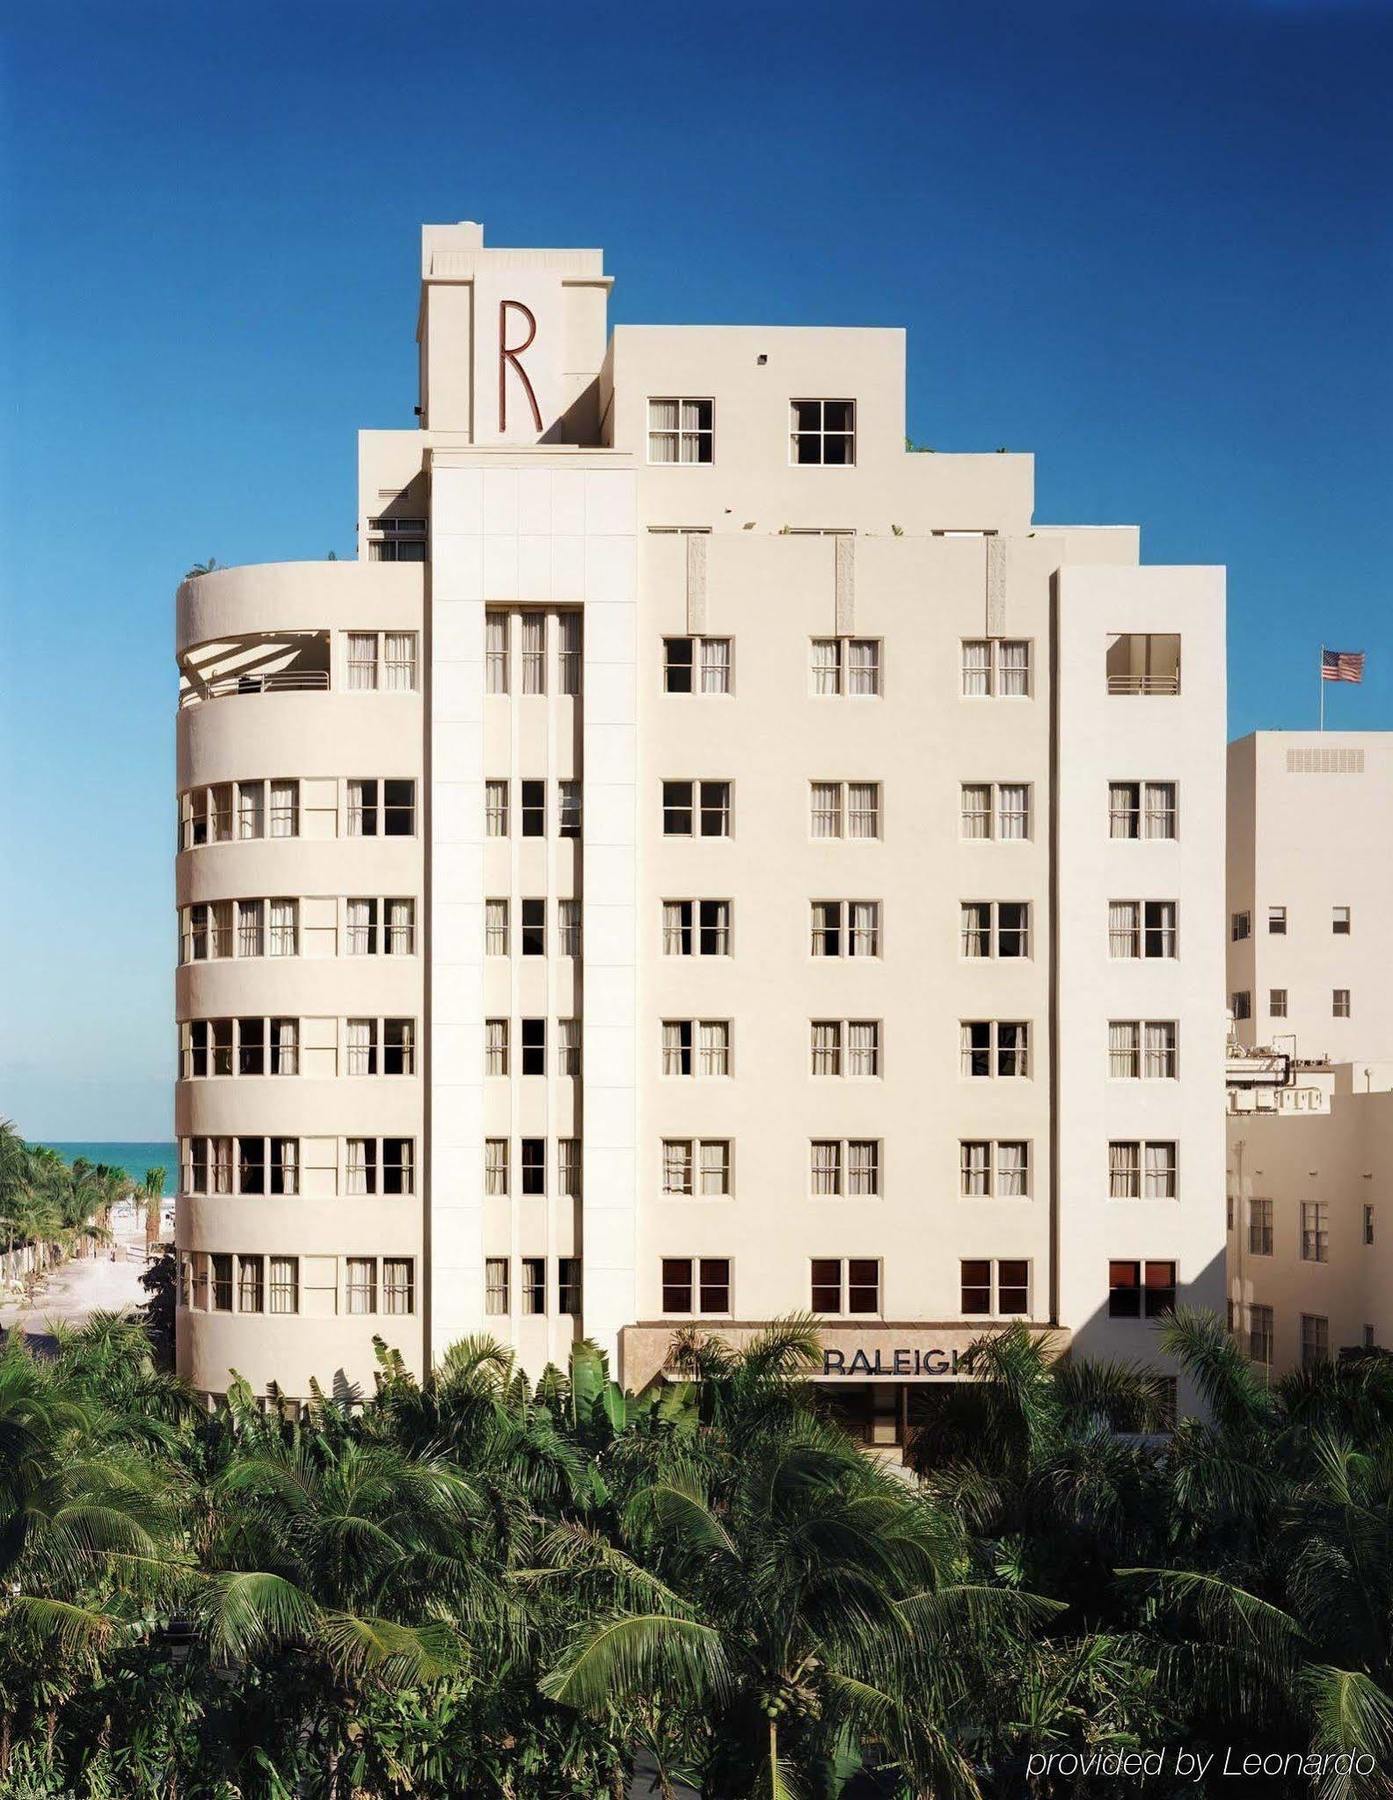 The Raleigh Hotel is a historic Art Deco gem on Collins Avenue, known for its elegant curves, vibrant colors, and tropical landscaping. Built in 1940, it has been meticulously restored and is now a boutique hotel that offers a tranquil oasis in the heart of South Beach.]]>